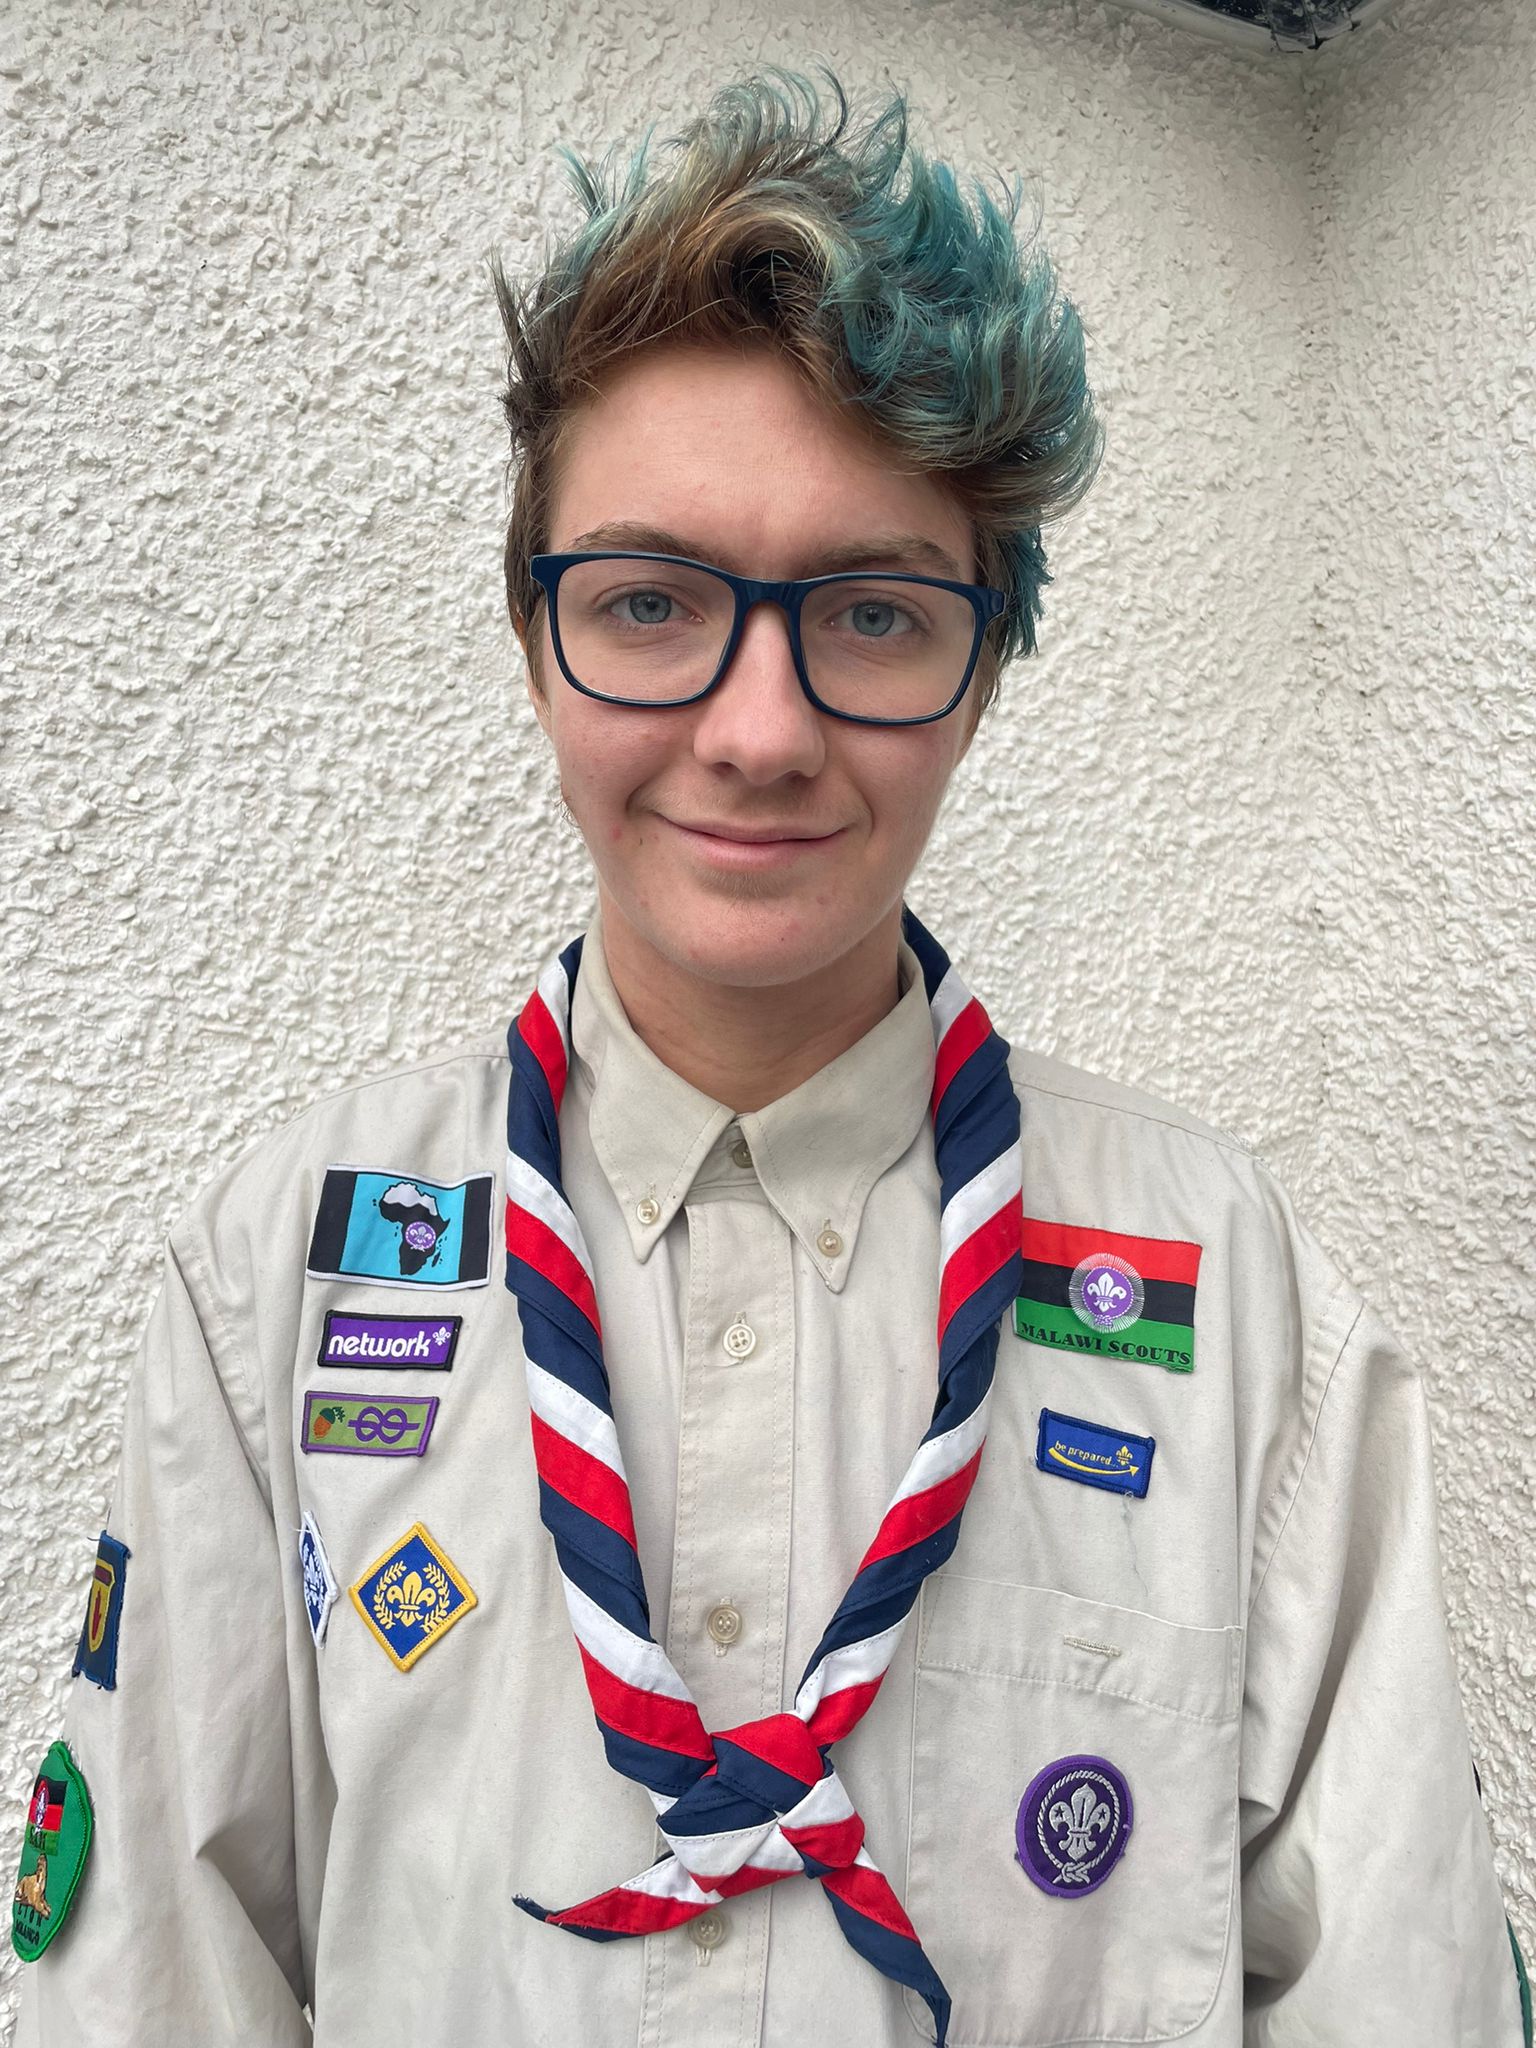 Jackson is smiling at the camera, wearing a volunteer uniform and the Scouts necker. Jackson has blue hair and glasses.